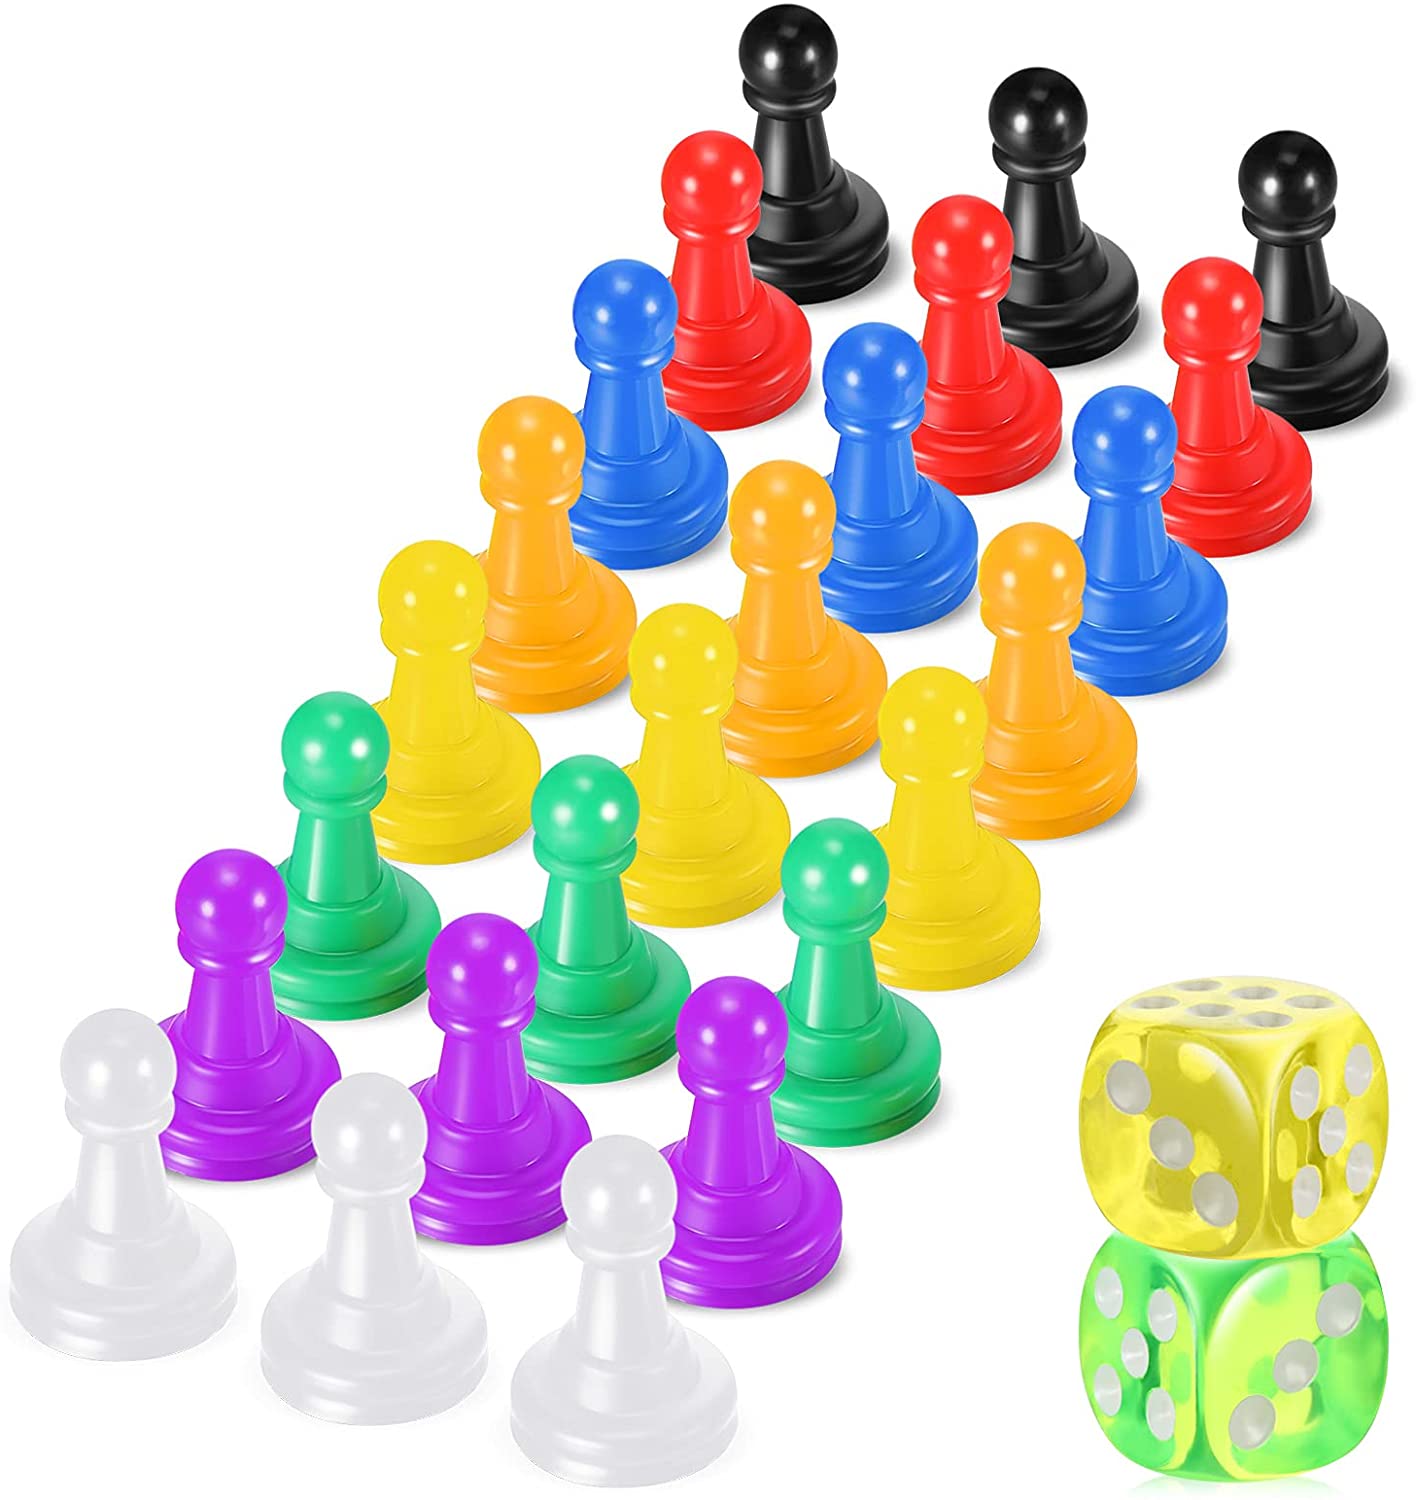 Details about   Pawn Pegs Game Pieces With Dice For Most Board Games Multi-Color Chess Pieces 